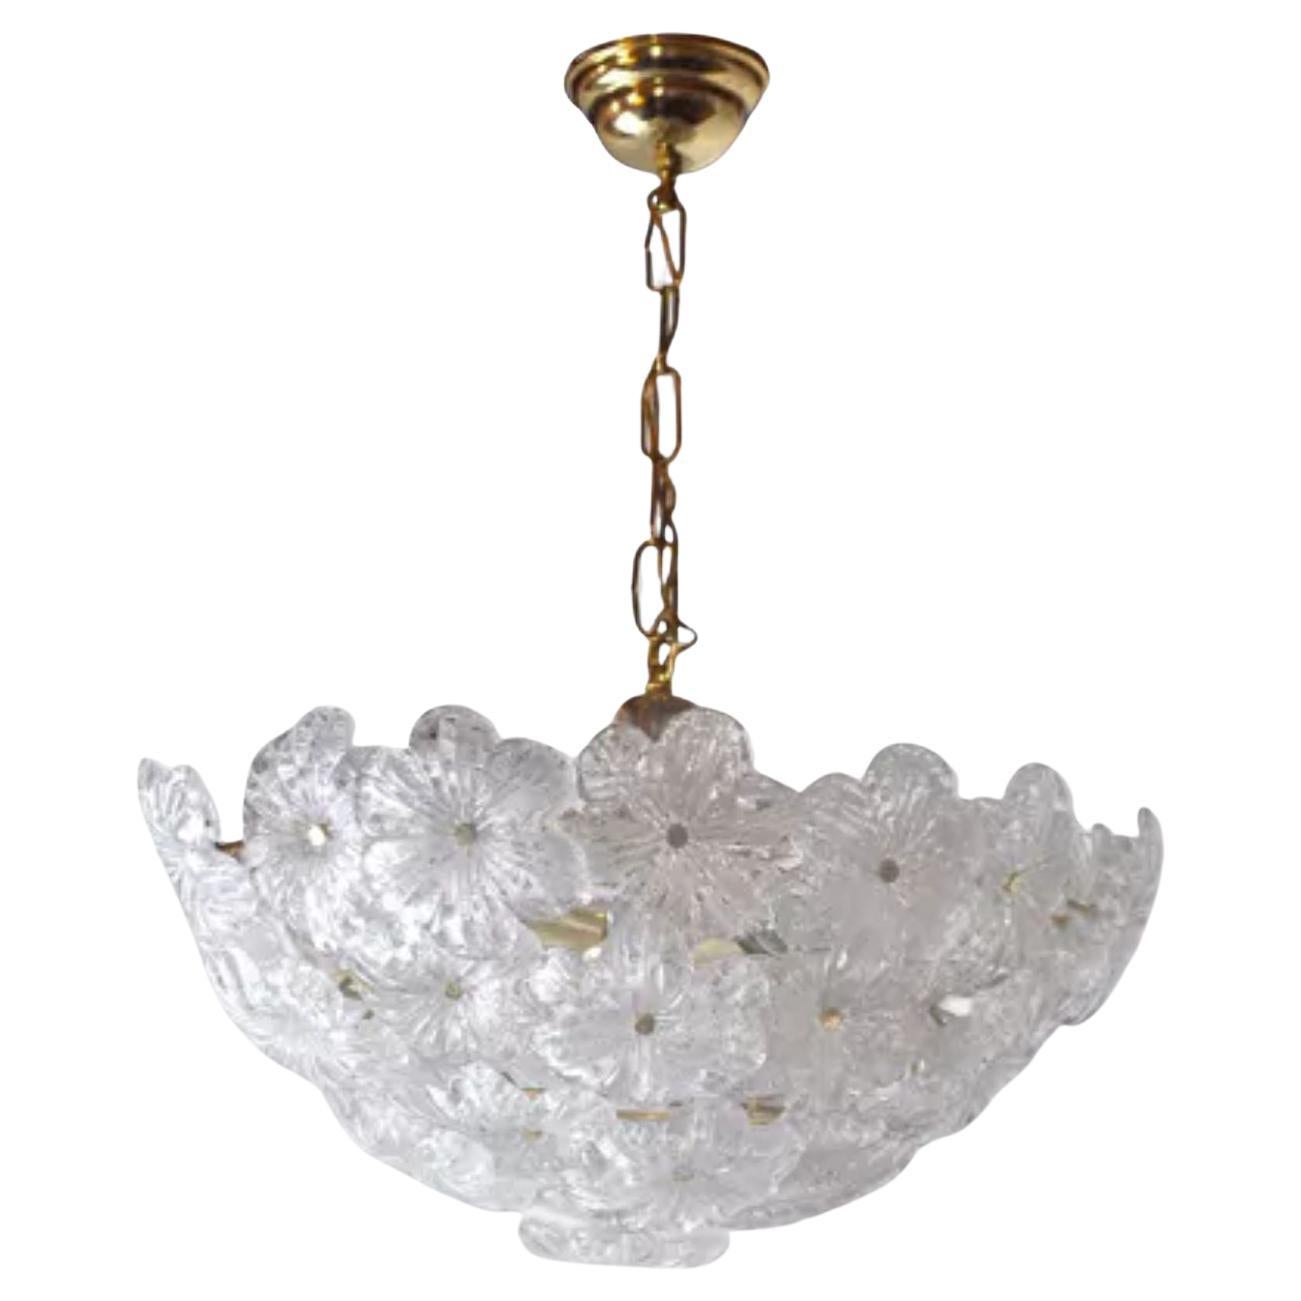 Mazzega Chandelier in Frosted Murano Glass, Italy, 1970